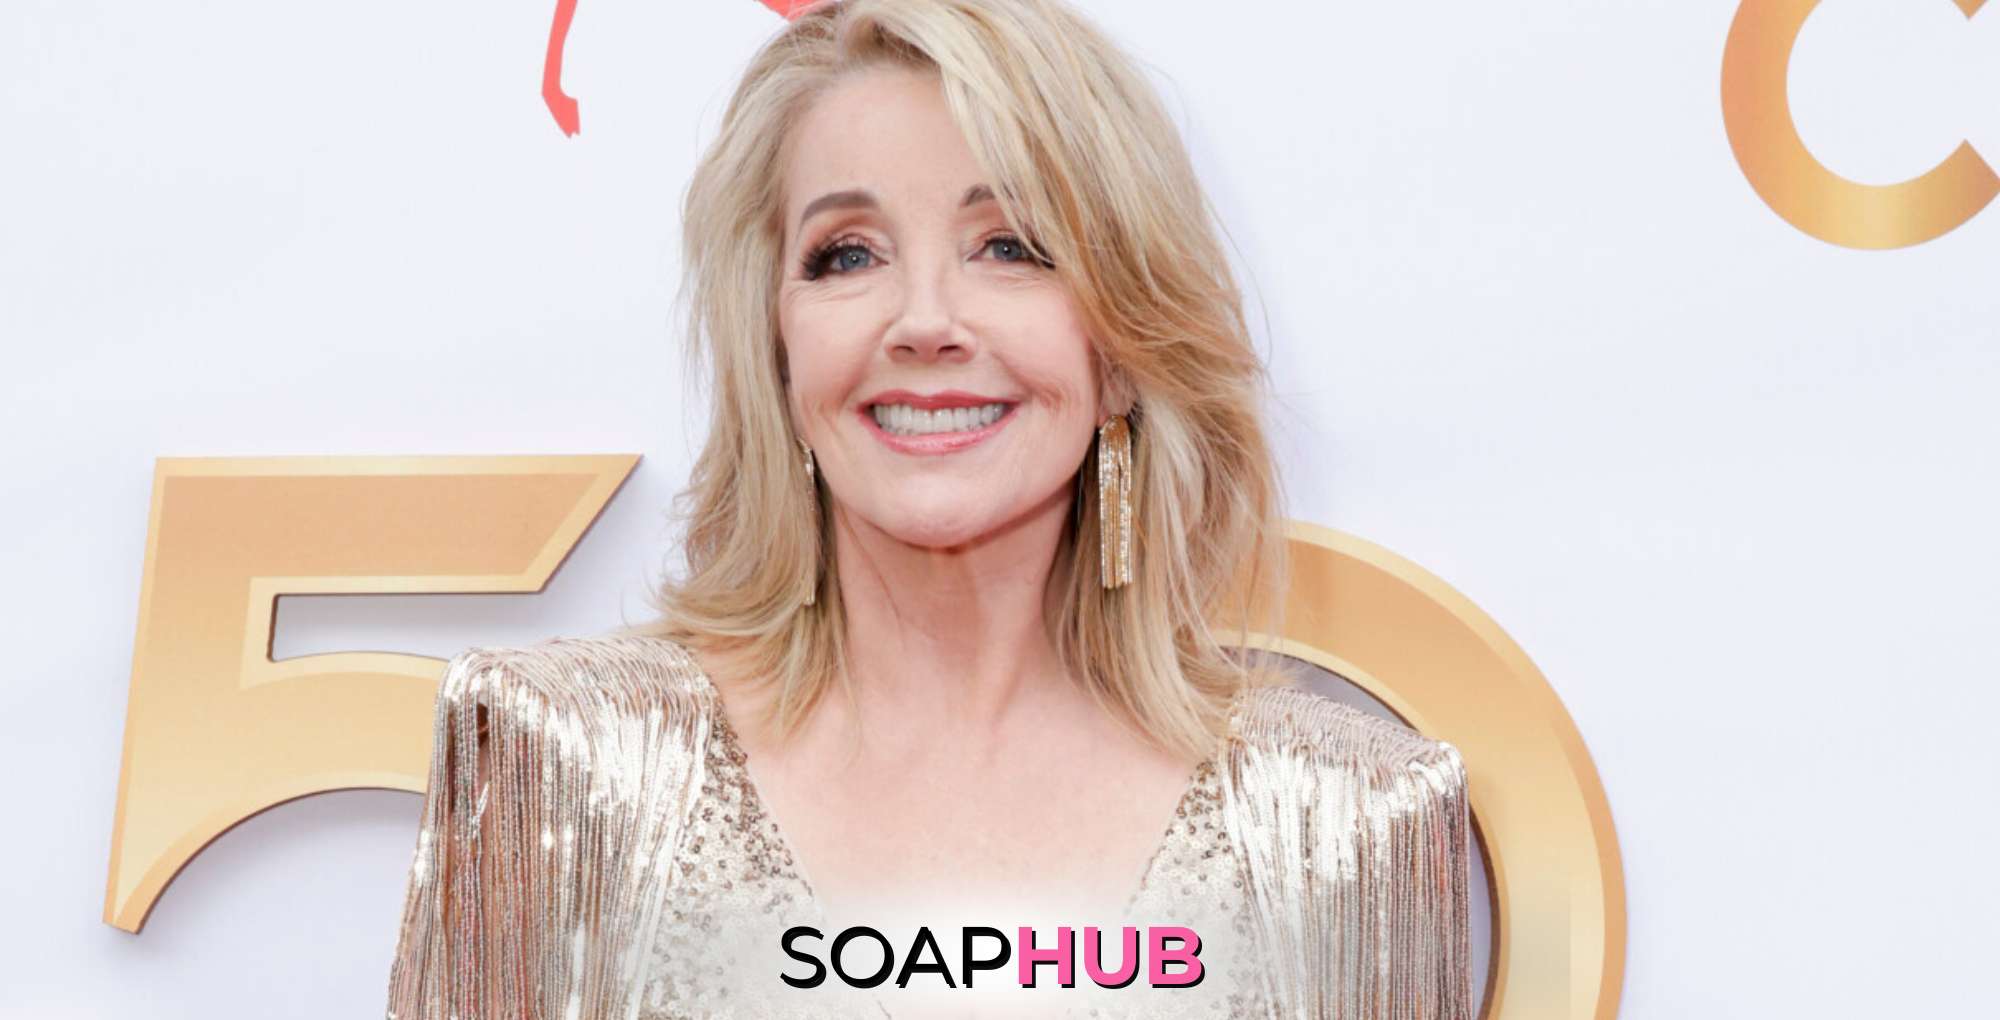 The Young and the Restless star Melody Thomas Scott with the Soap Hub logo across the bottom.